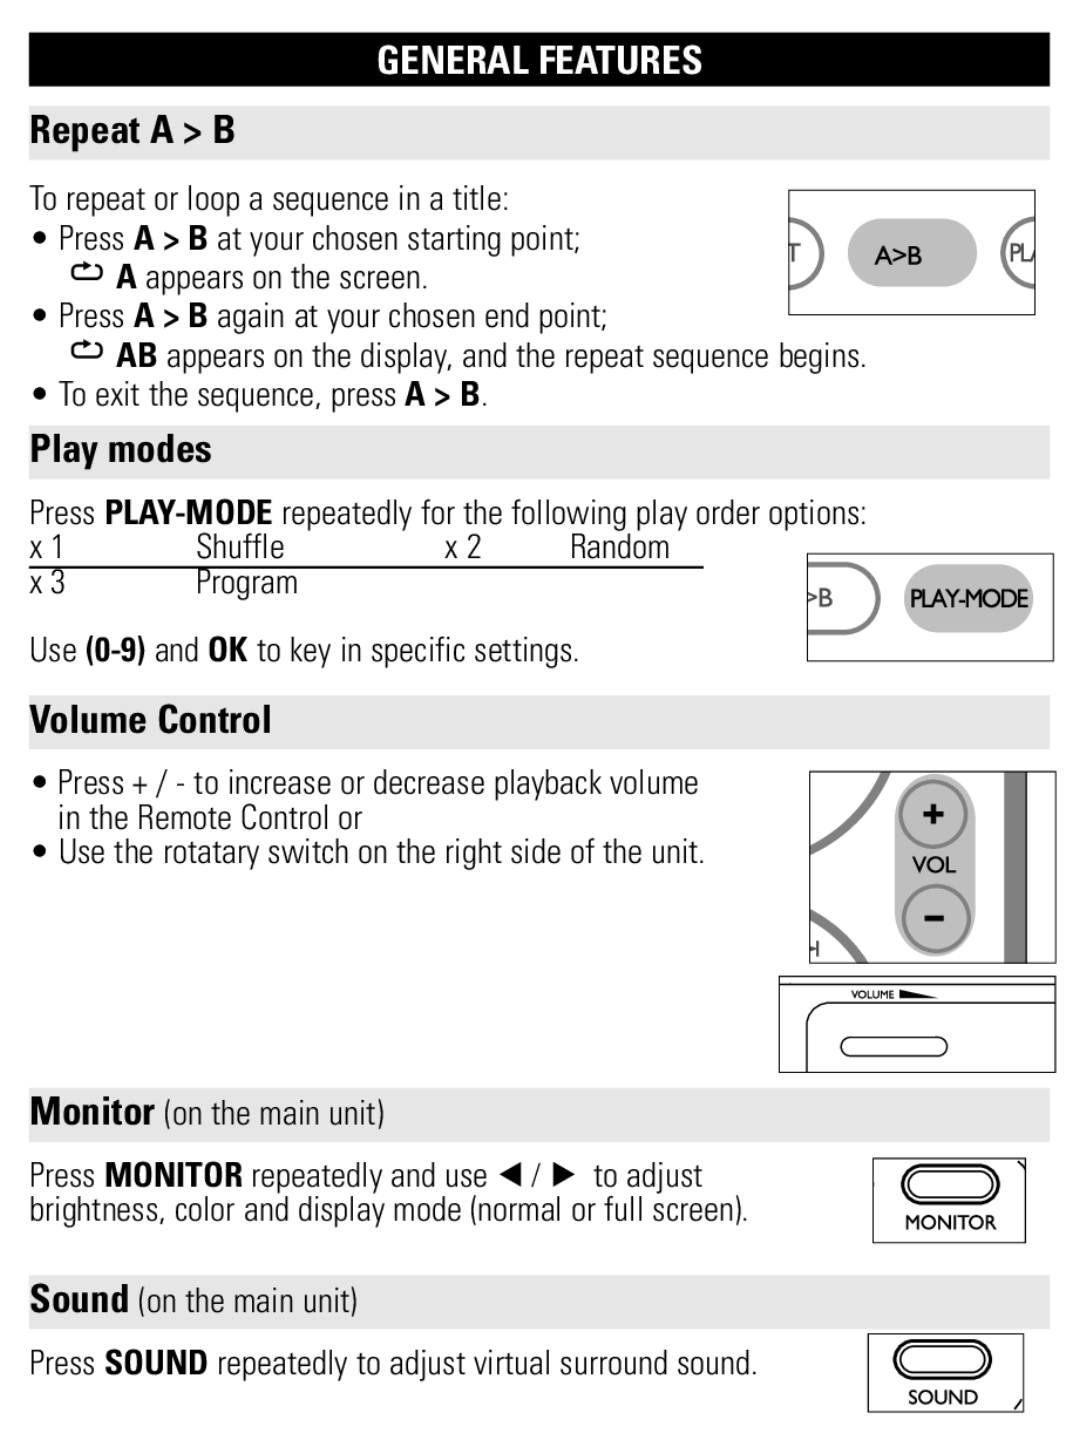 Philips PET1002 user manual Repeat A B, Play modes, Volume Control, General Features, Random 